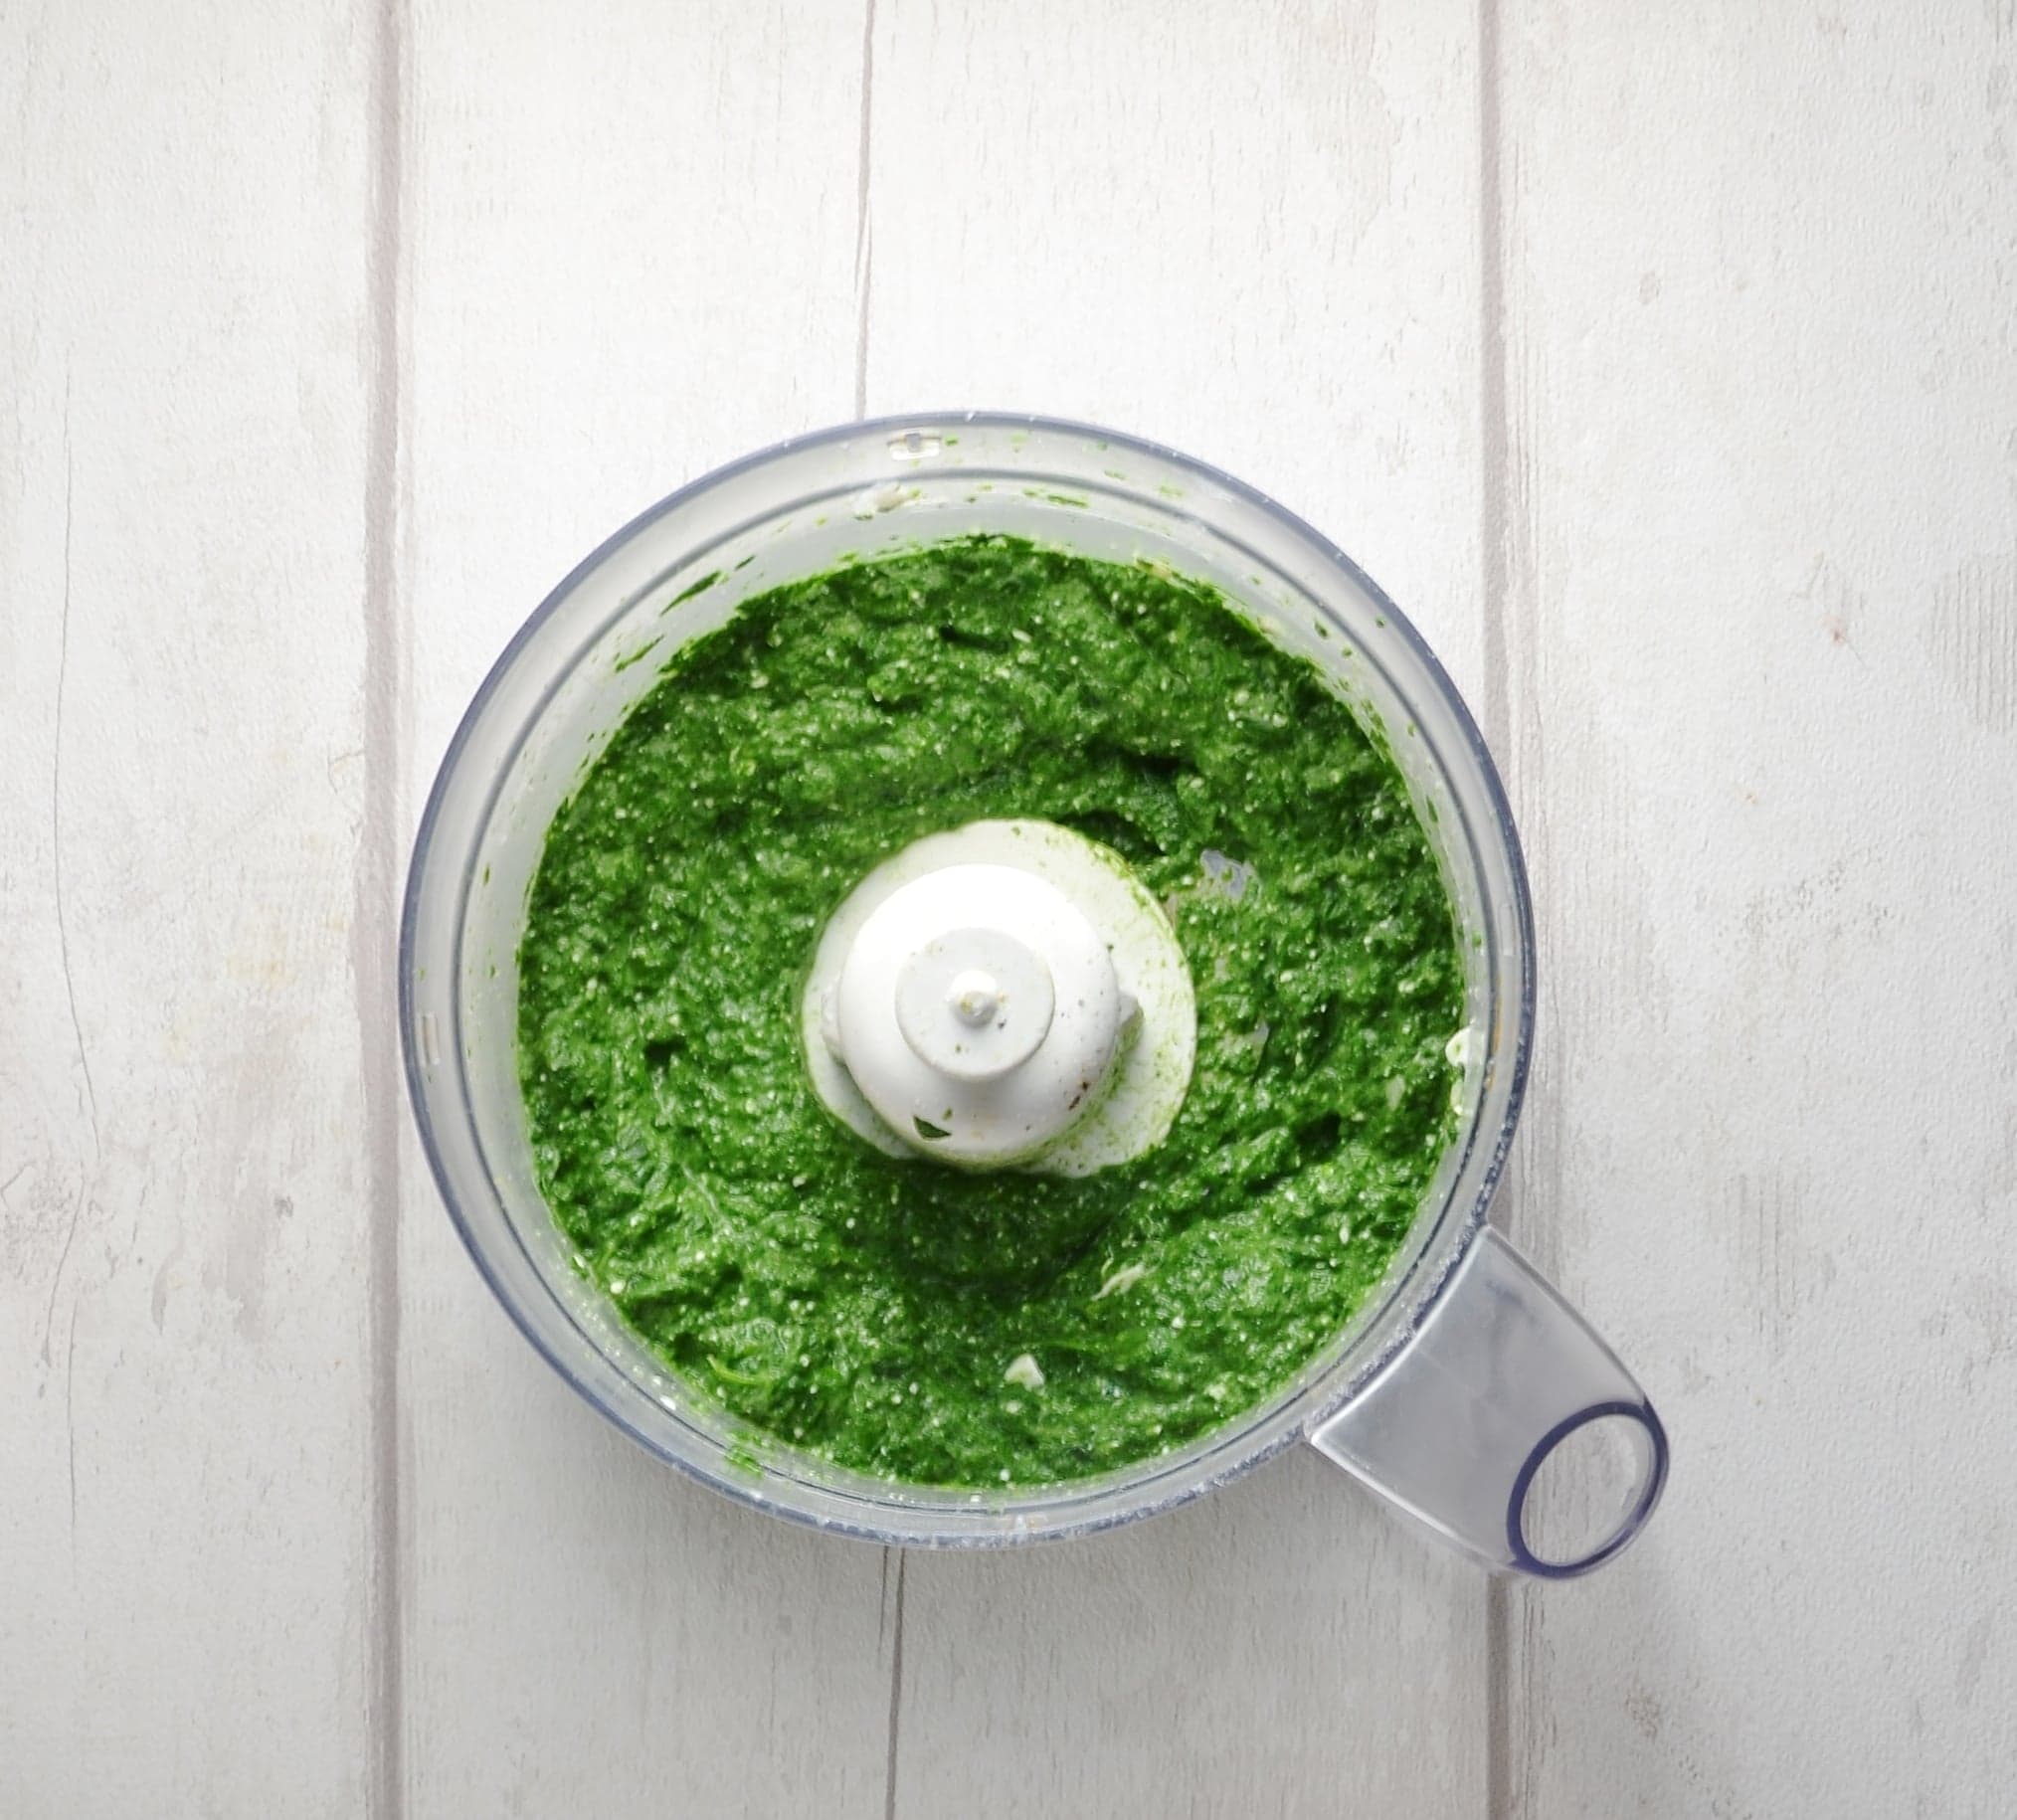 Top down view of spinach filling mixture in blender bowl on white wood background.